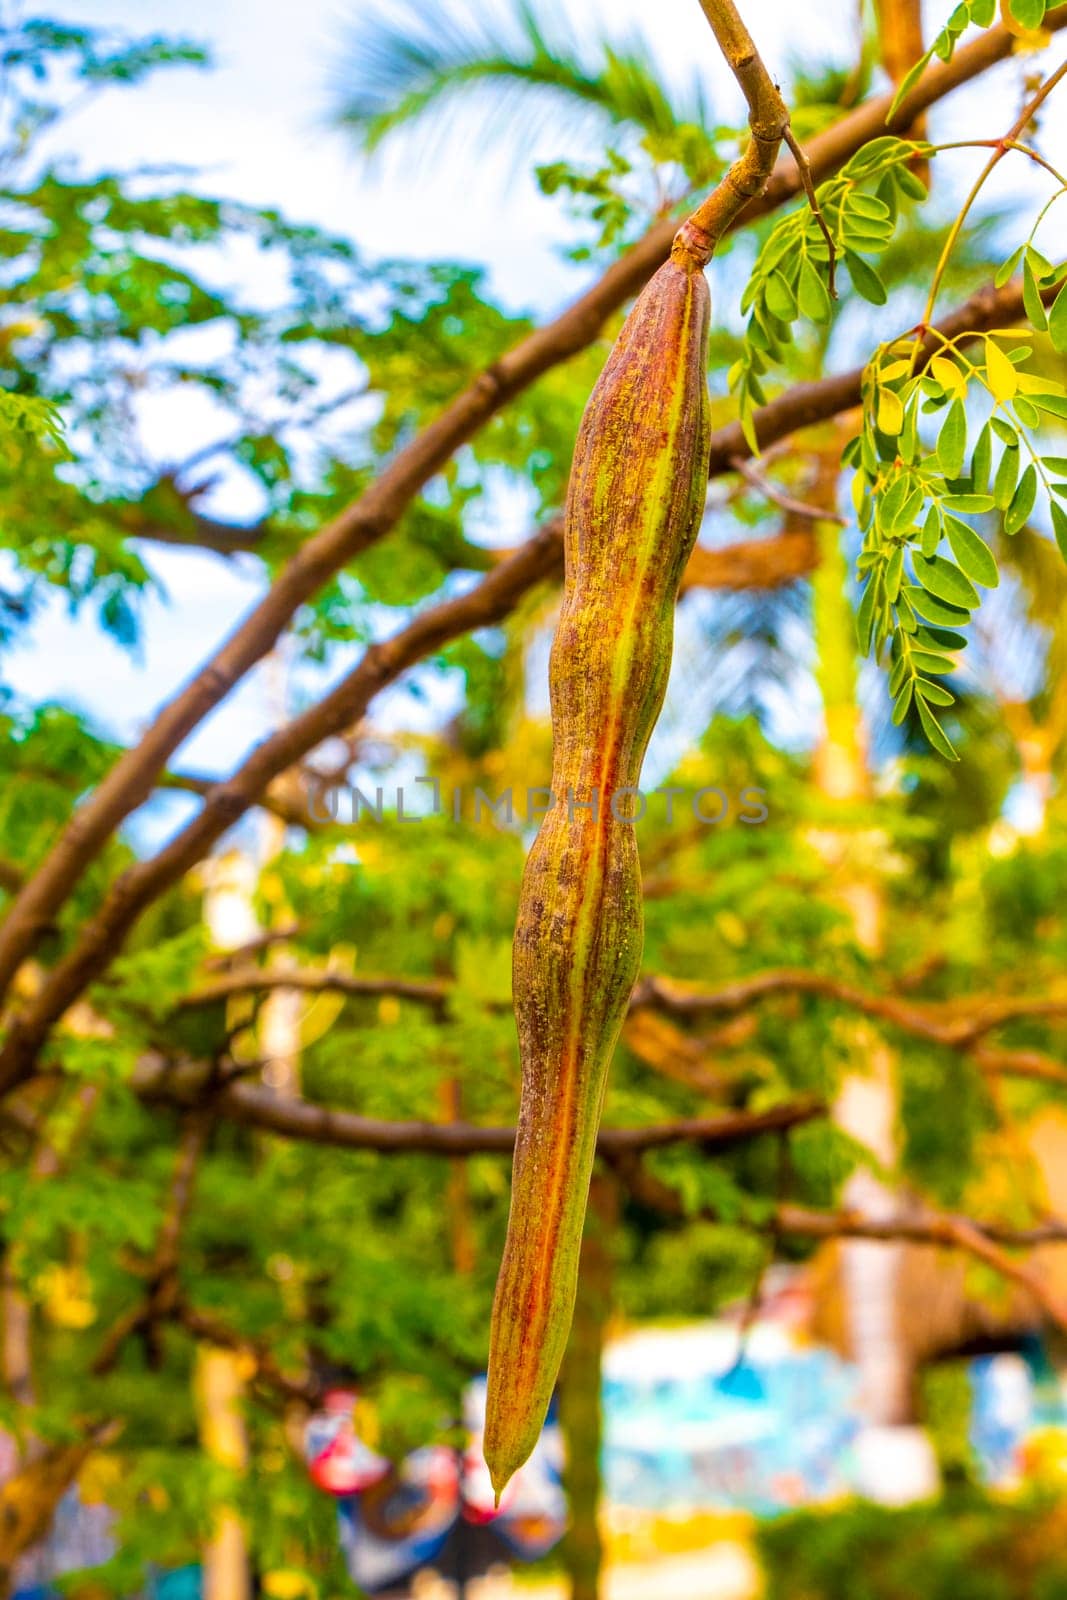 Seeds and flowers blossoms of moringa tree and green tree top with blue sky background in Playa del Carmen Quintana Roo Mexico.